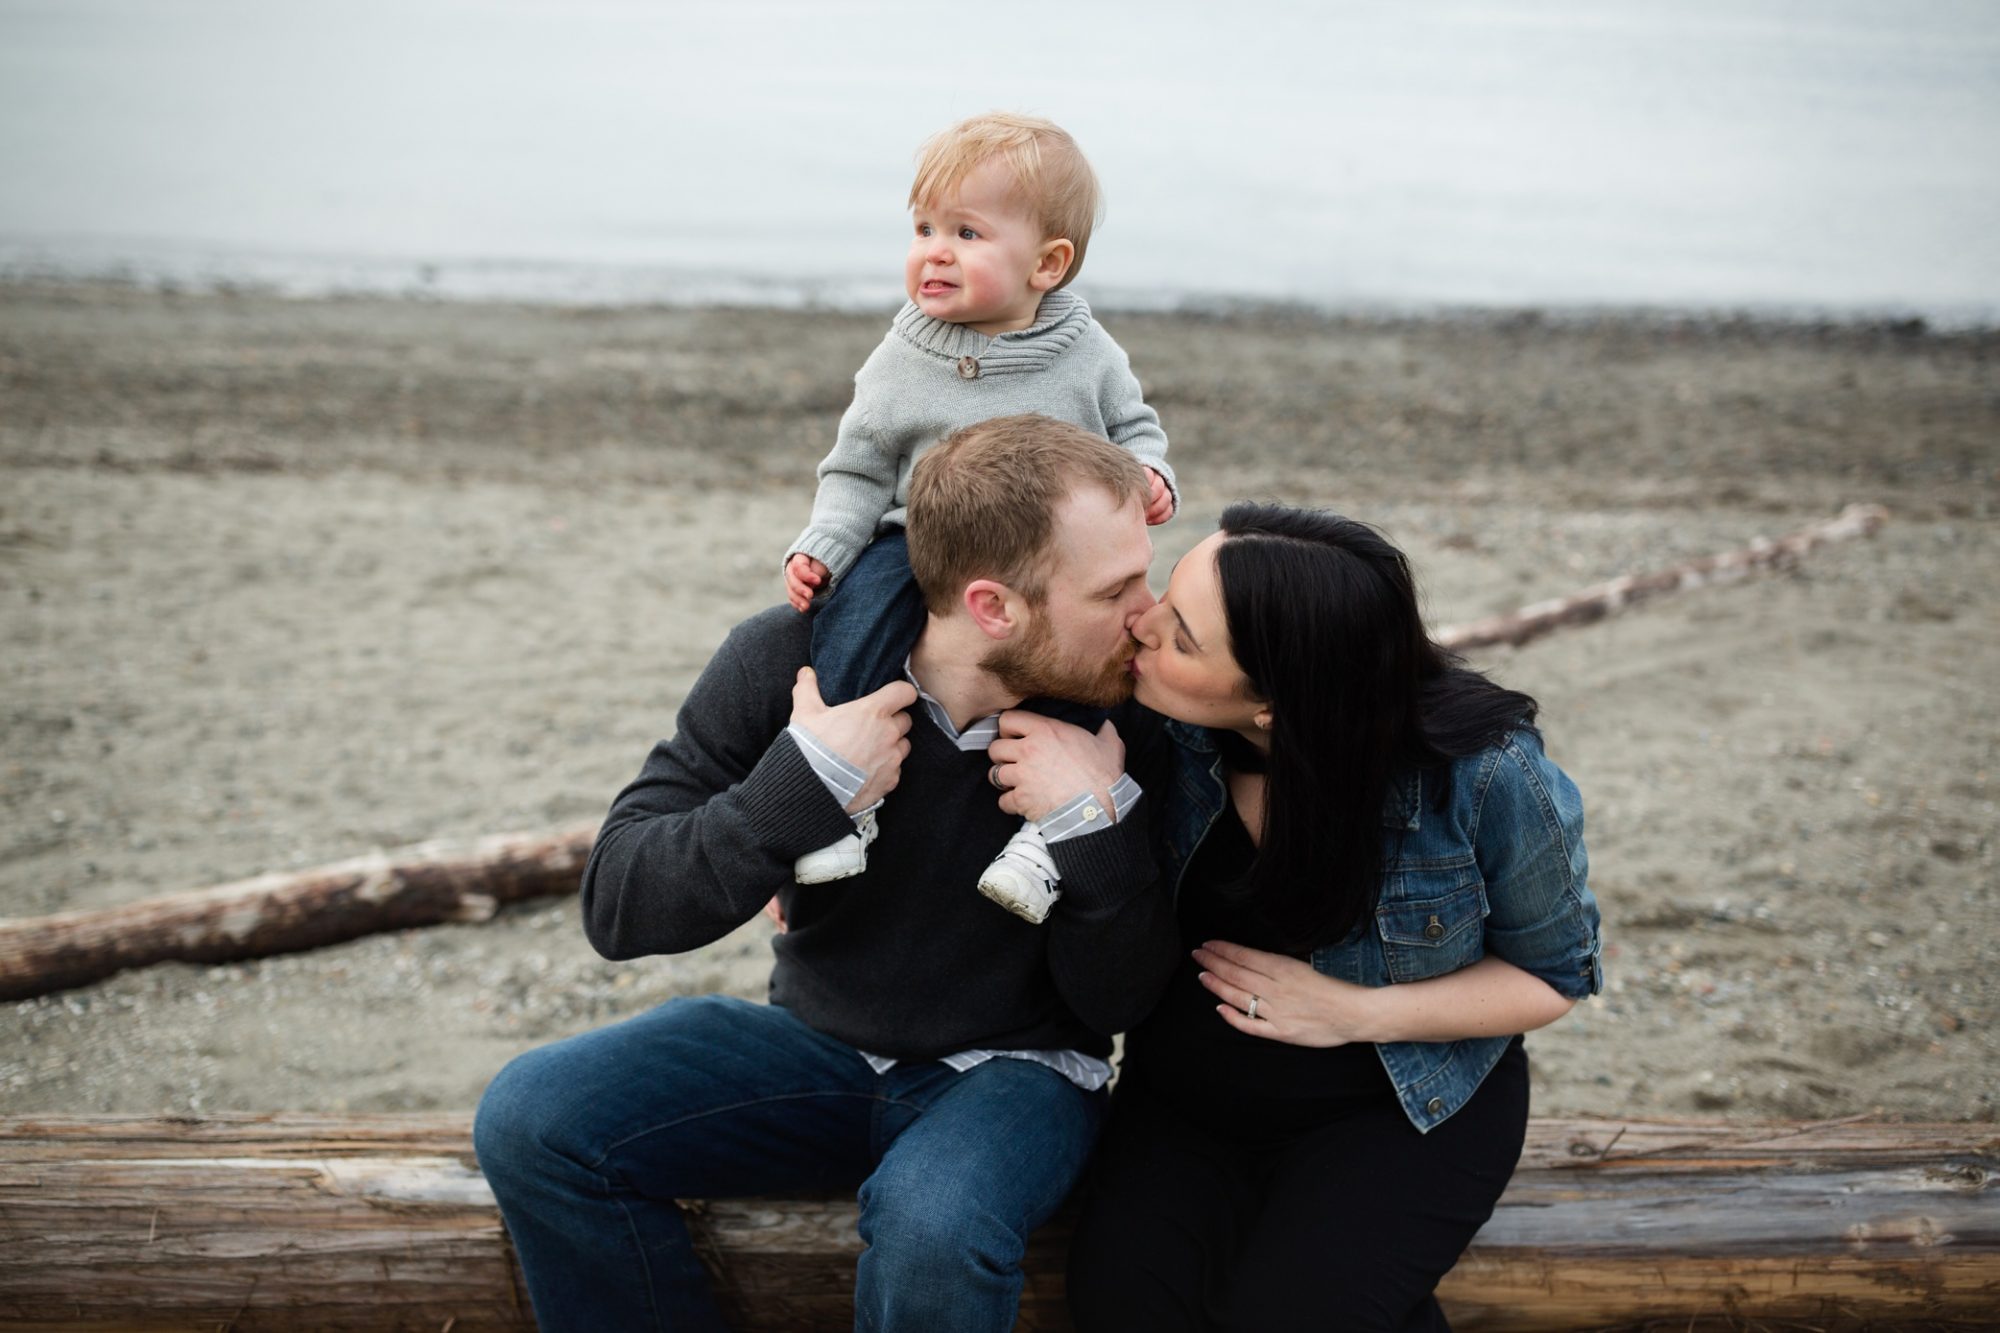 tacoma waterfront maternity session | puyallup maternity photographer | seattle pregnancy photos